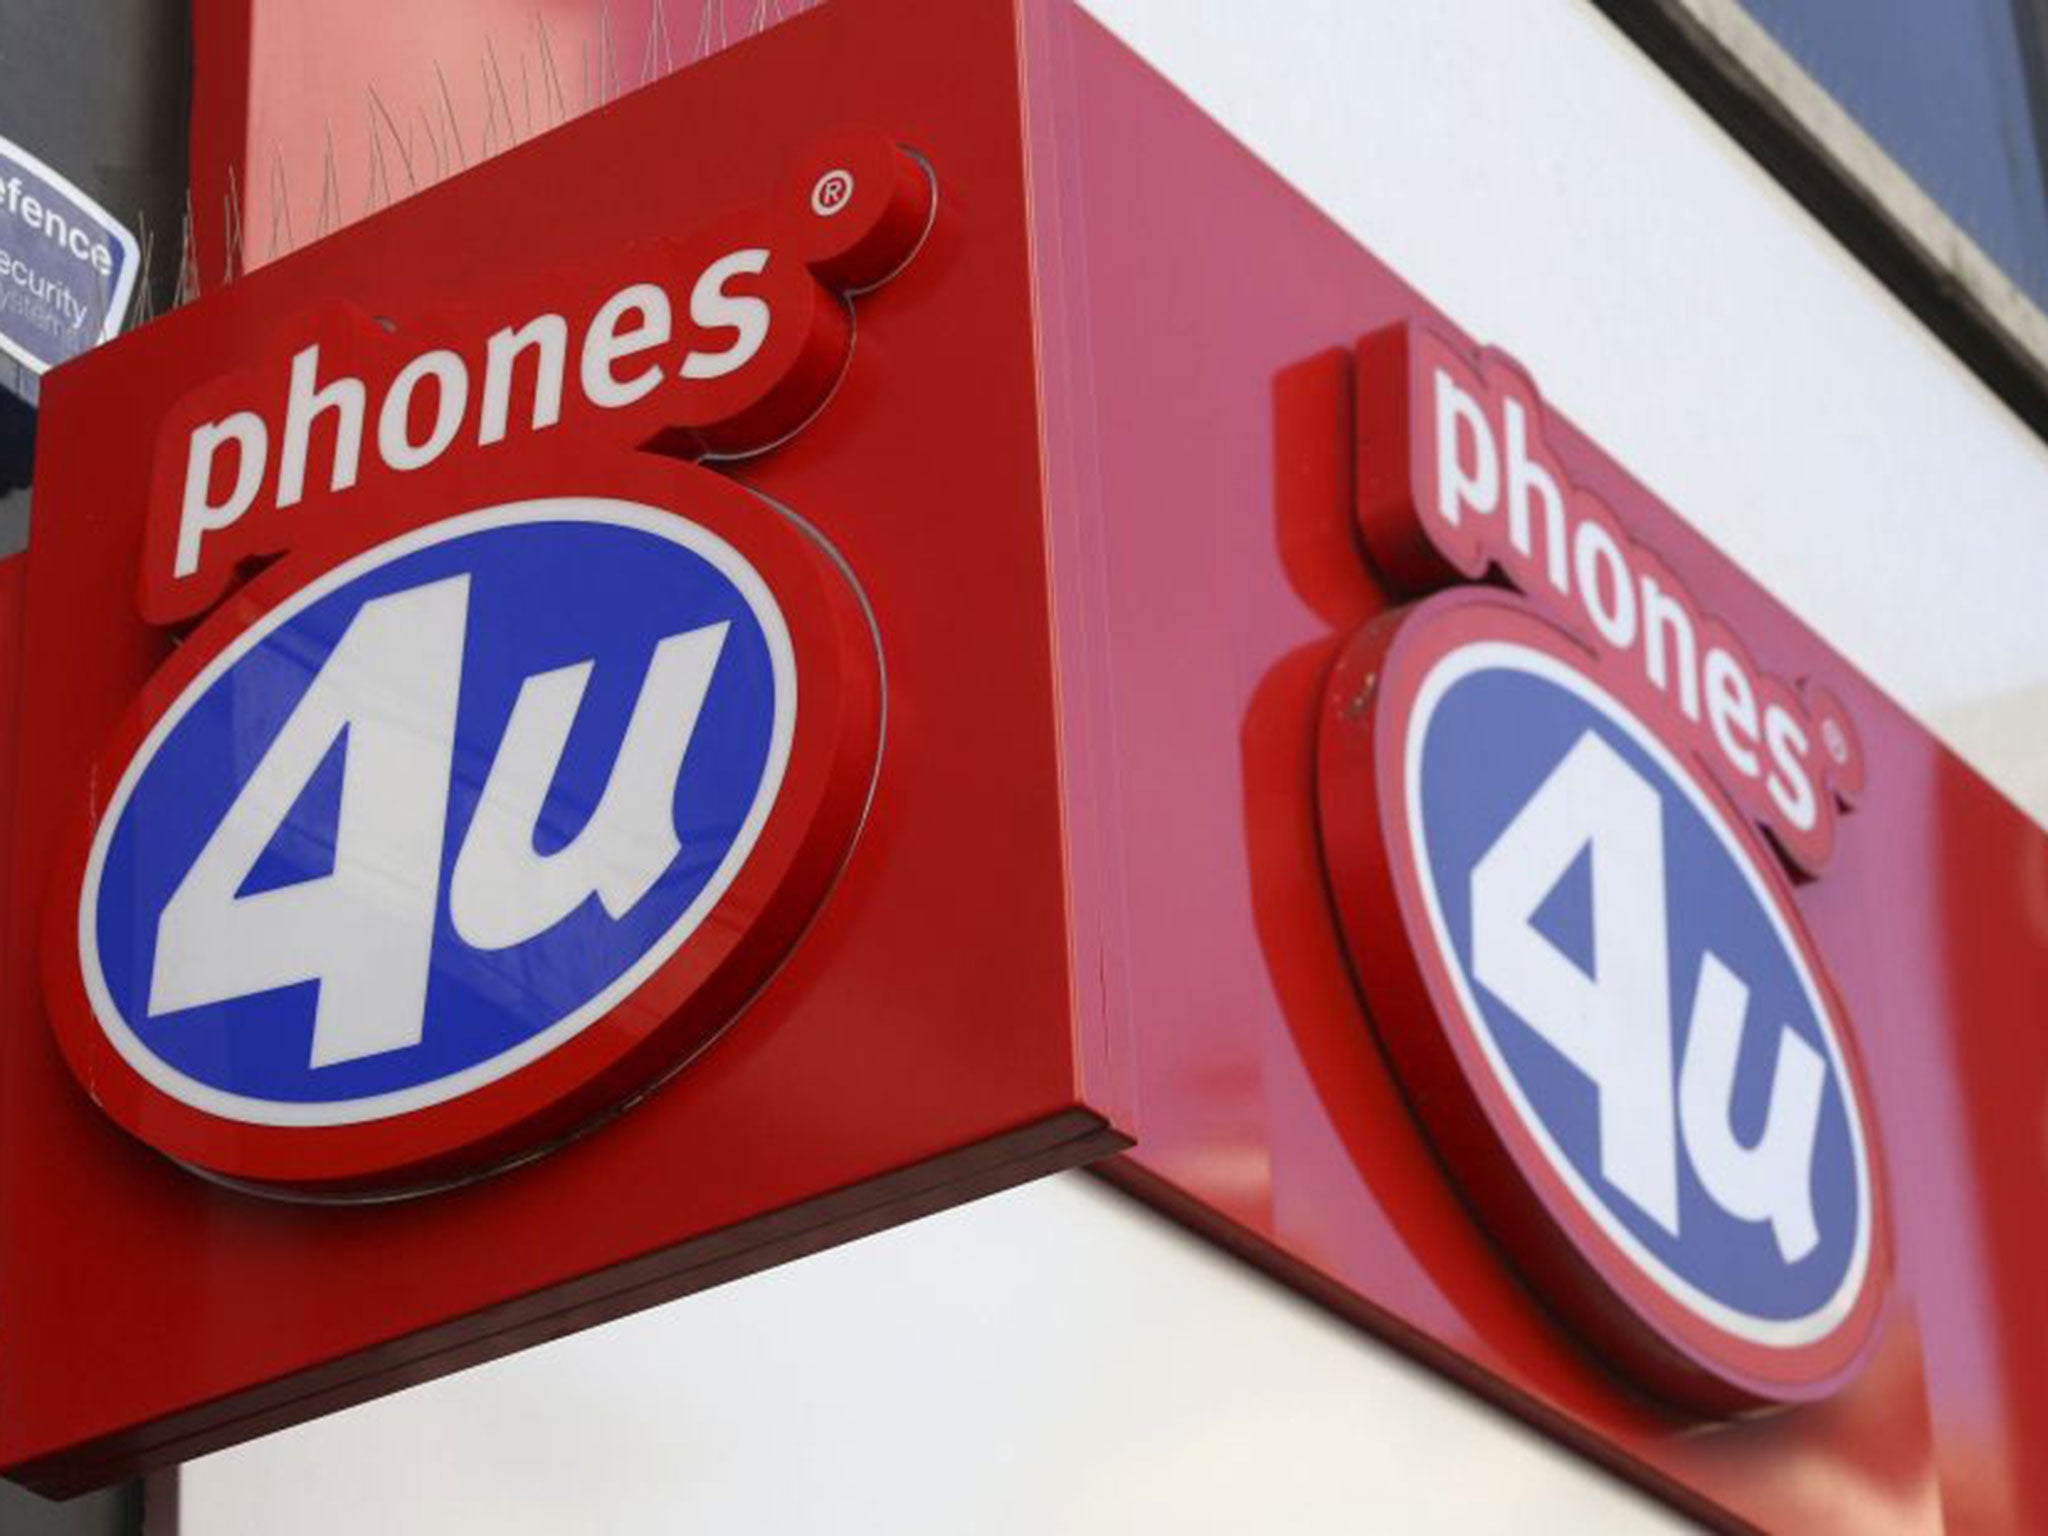 The collapse of Phones 4U in September last year threatened the loss of 5,000 jobs